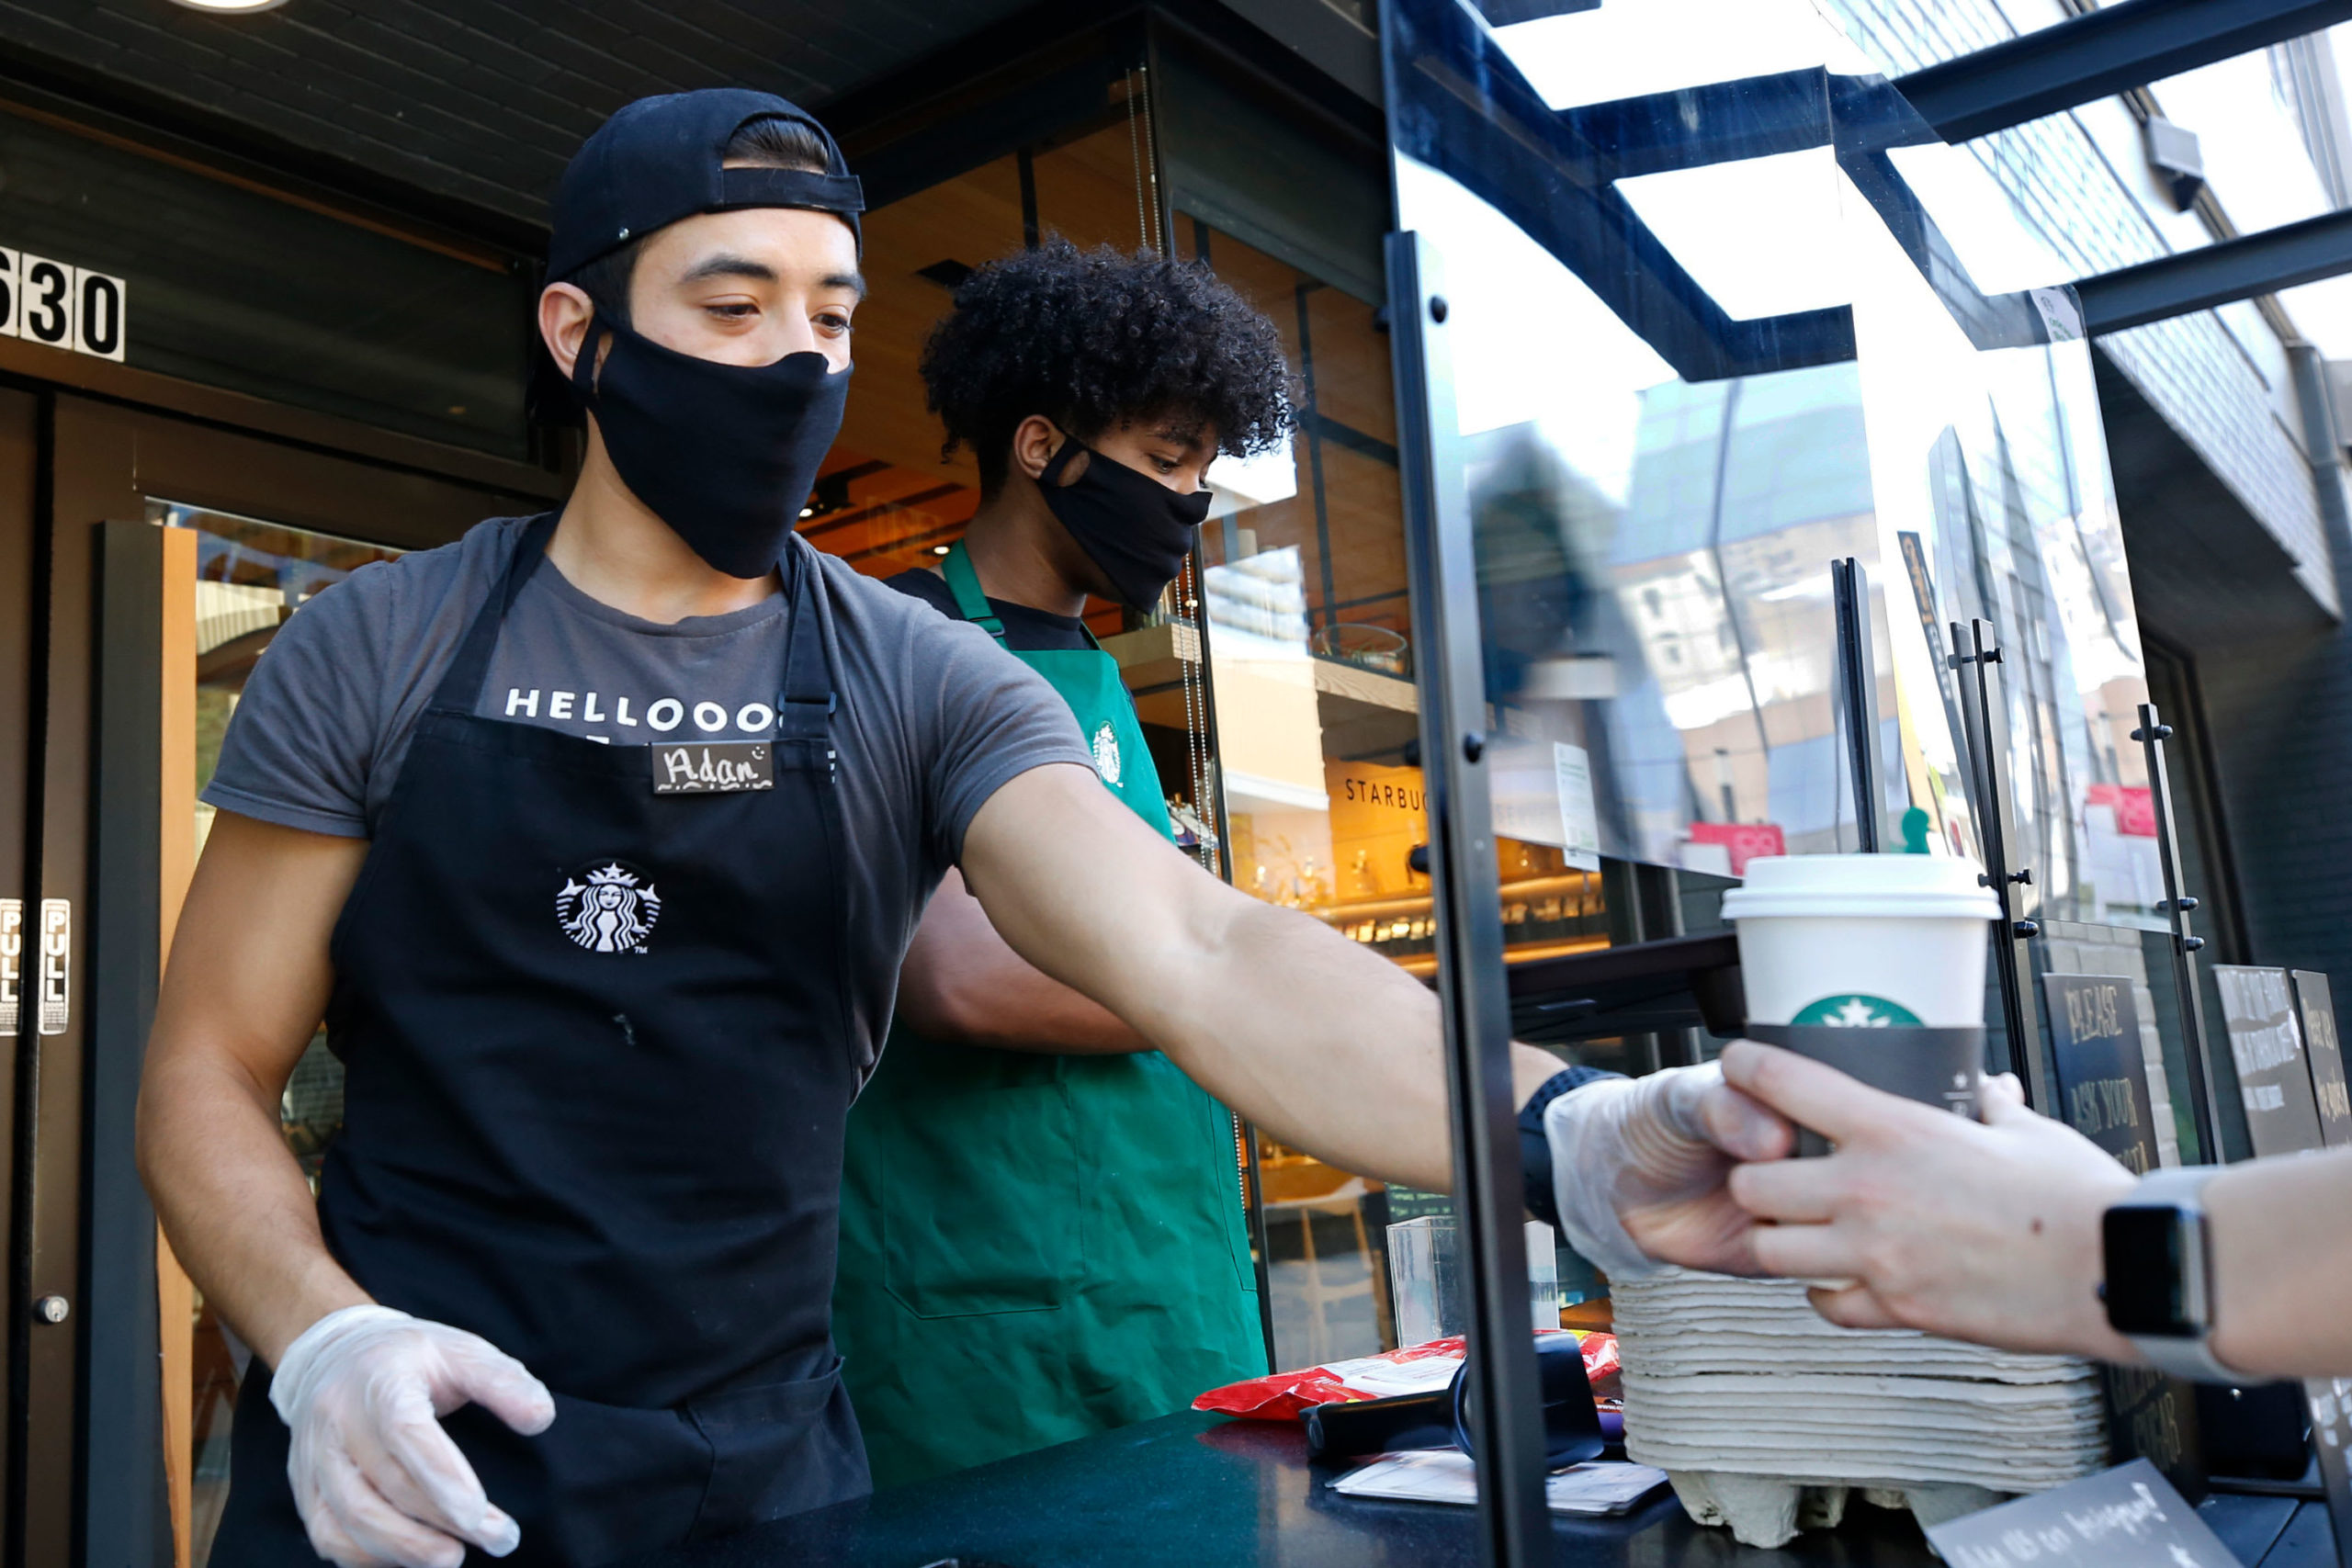 Starbucks would require prospects put on facial coverings